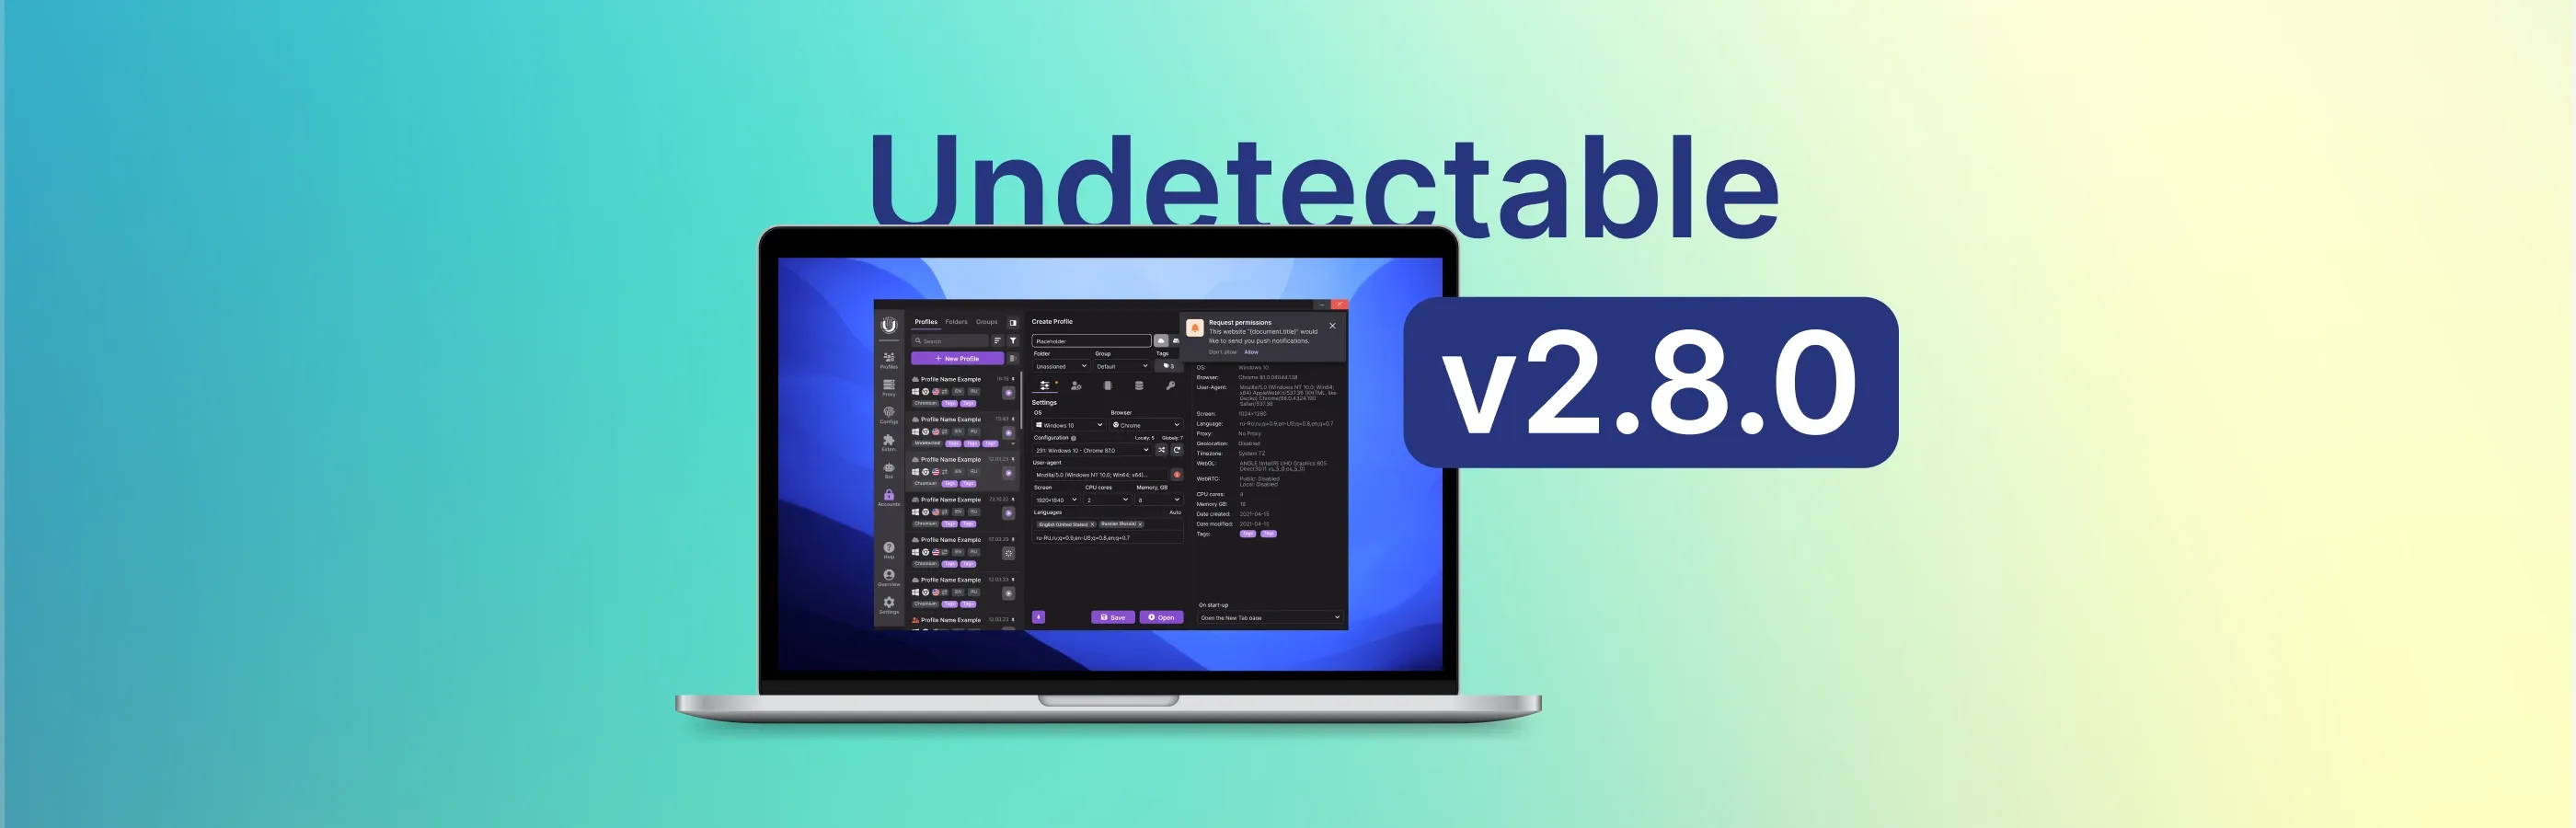 Undetectable browser 2.8.0のアップデート：ダークテーマと新機能